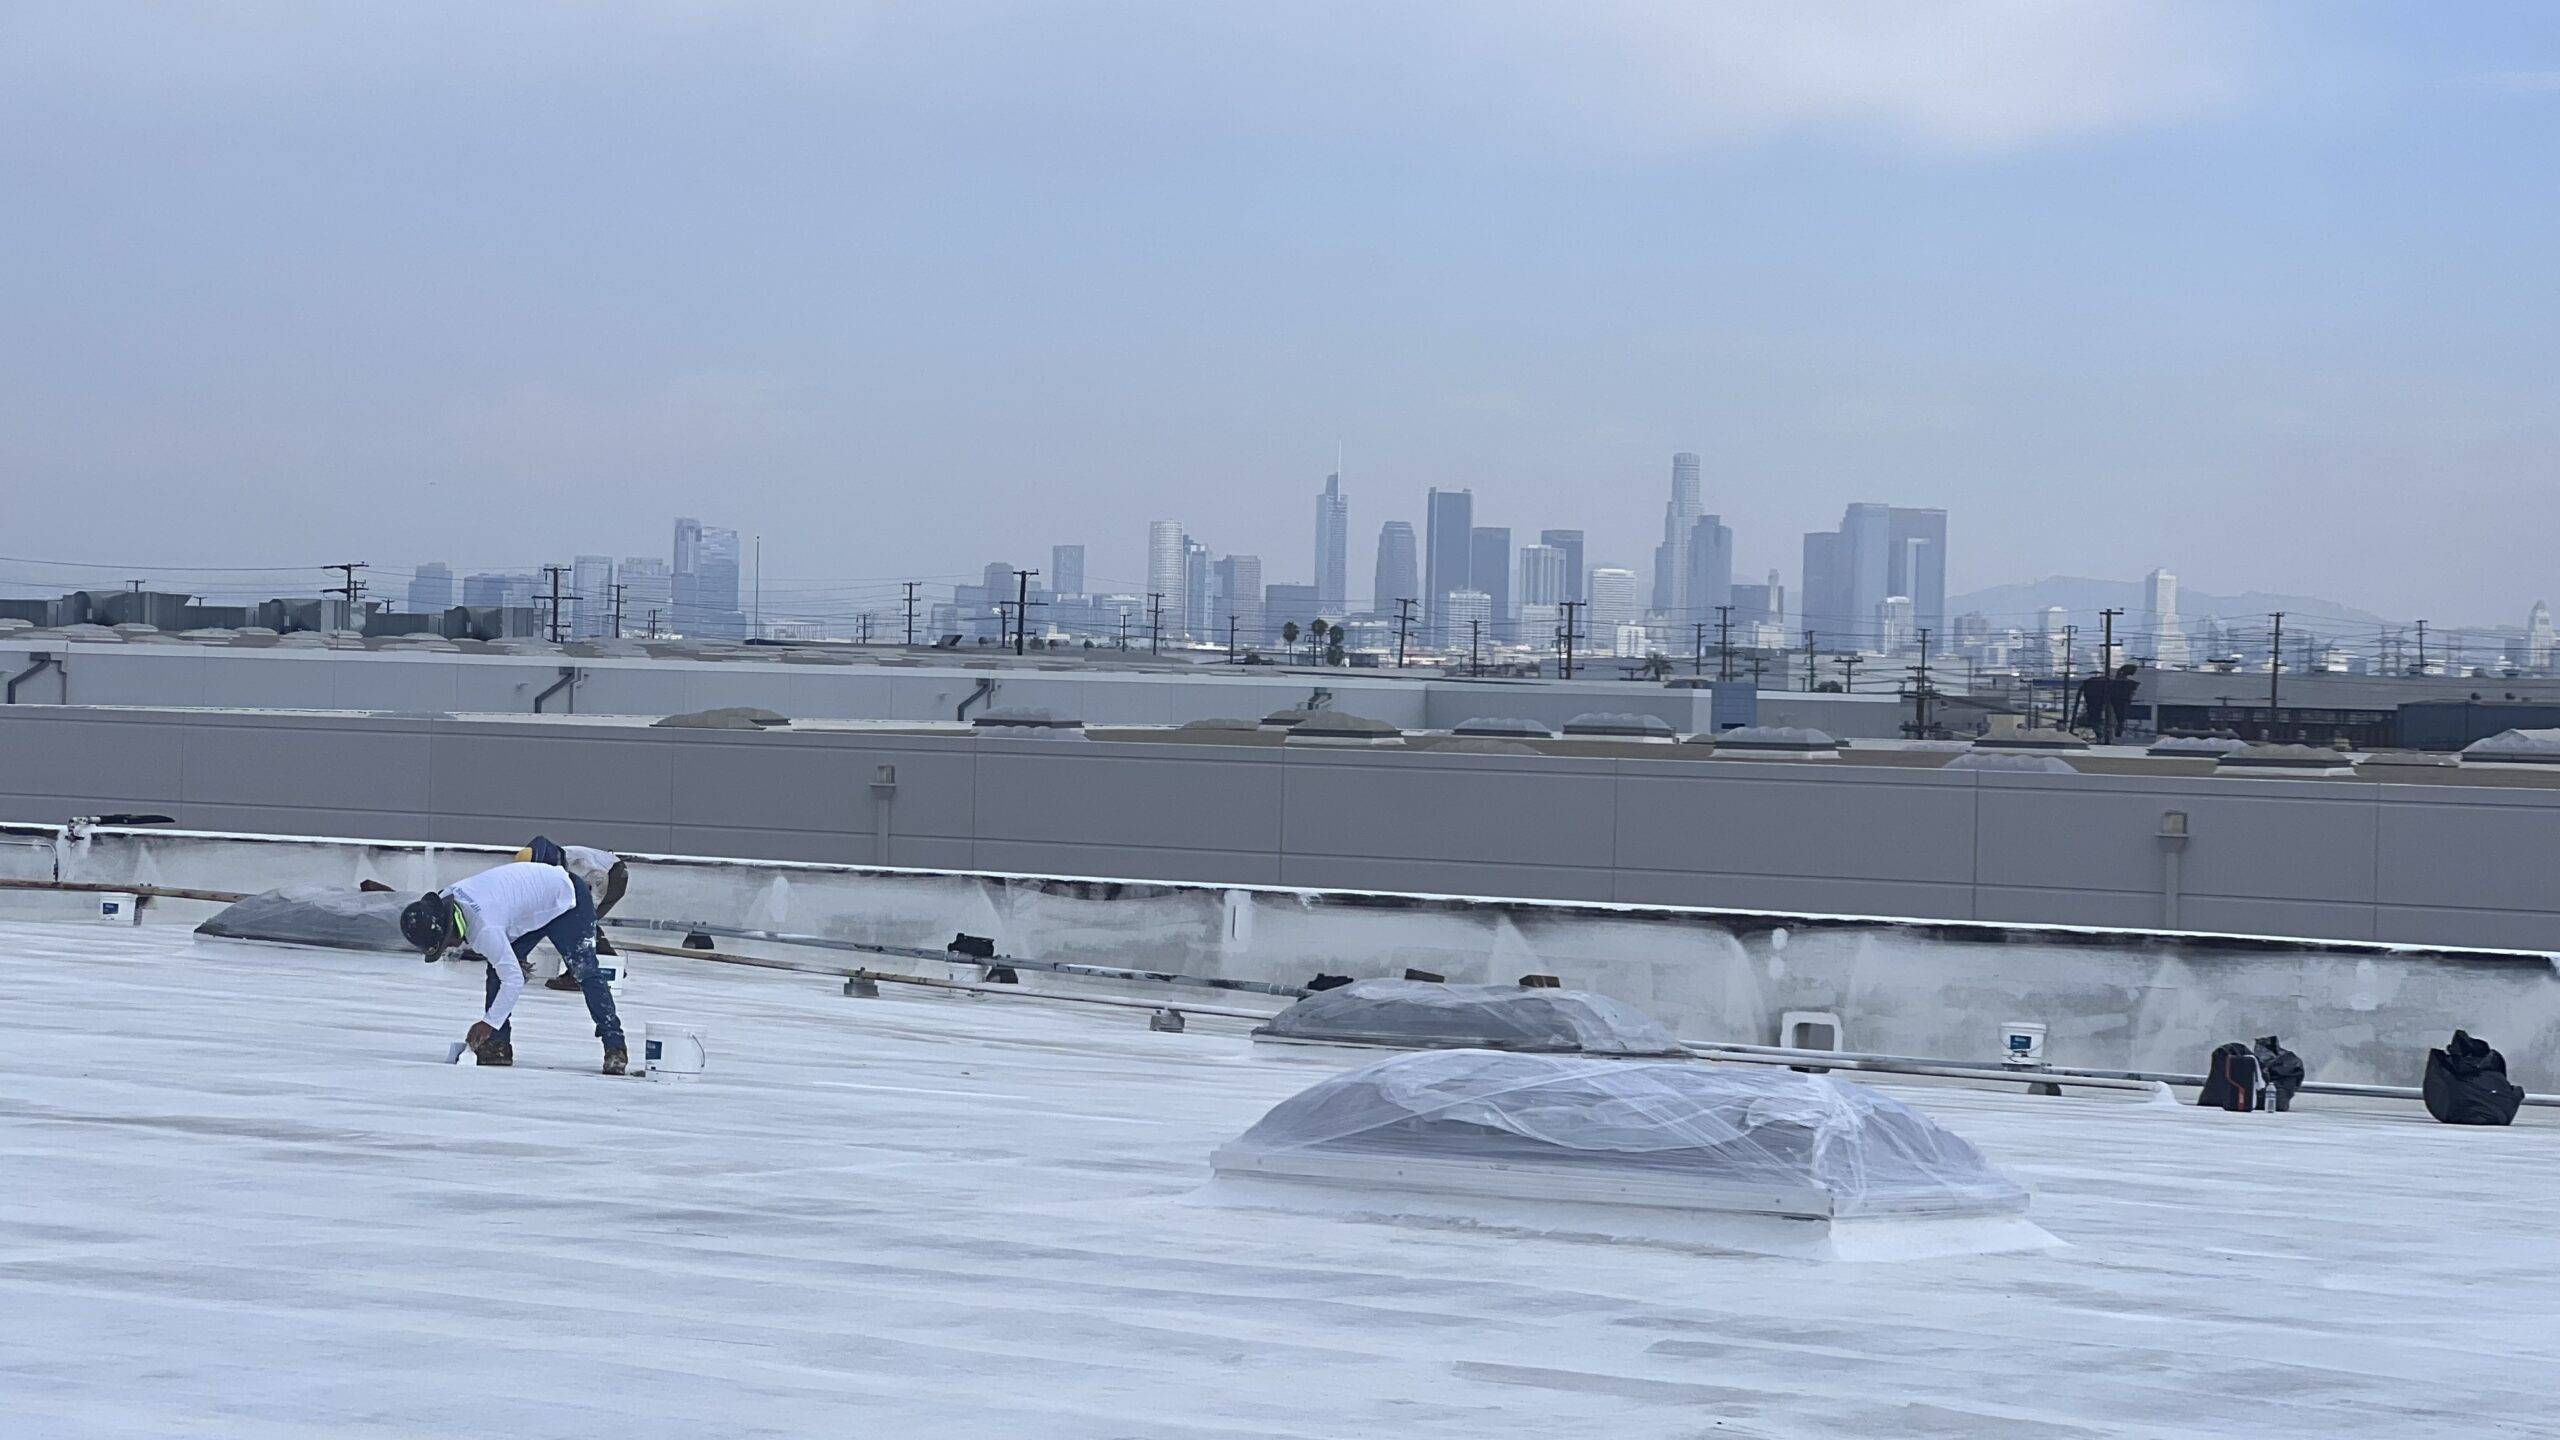 A man is working on a roof with a city in the background.